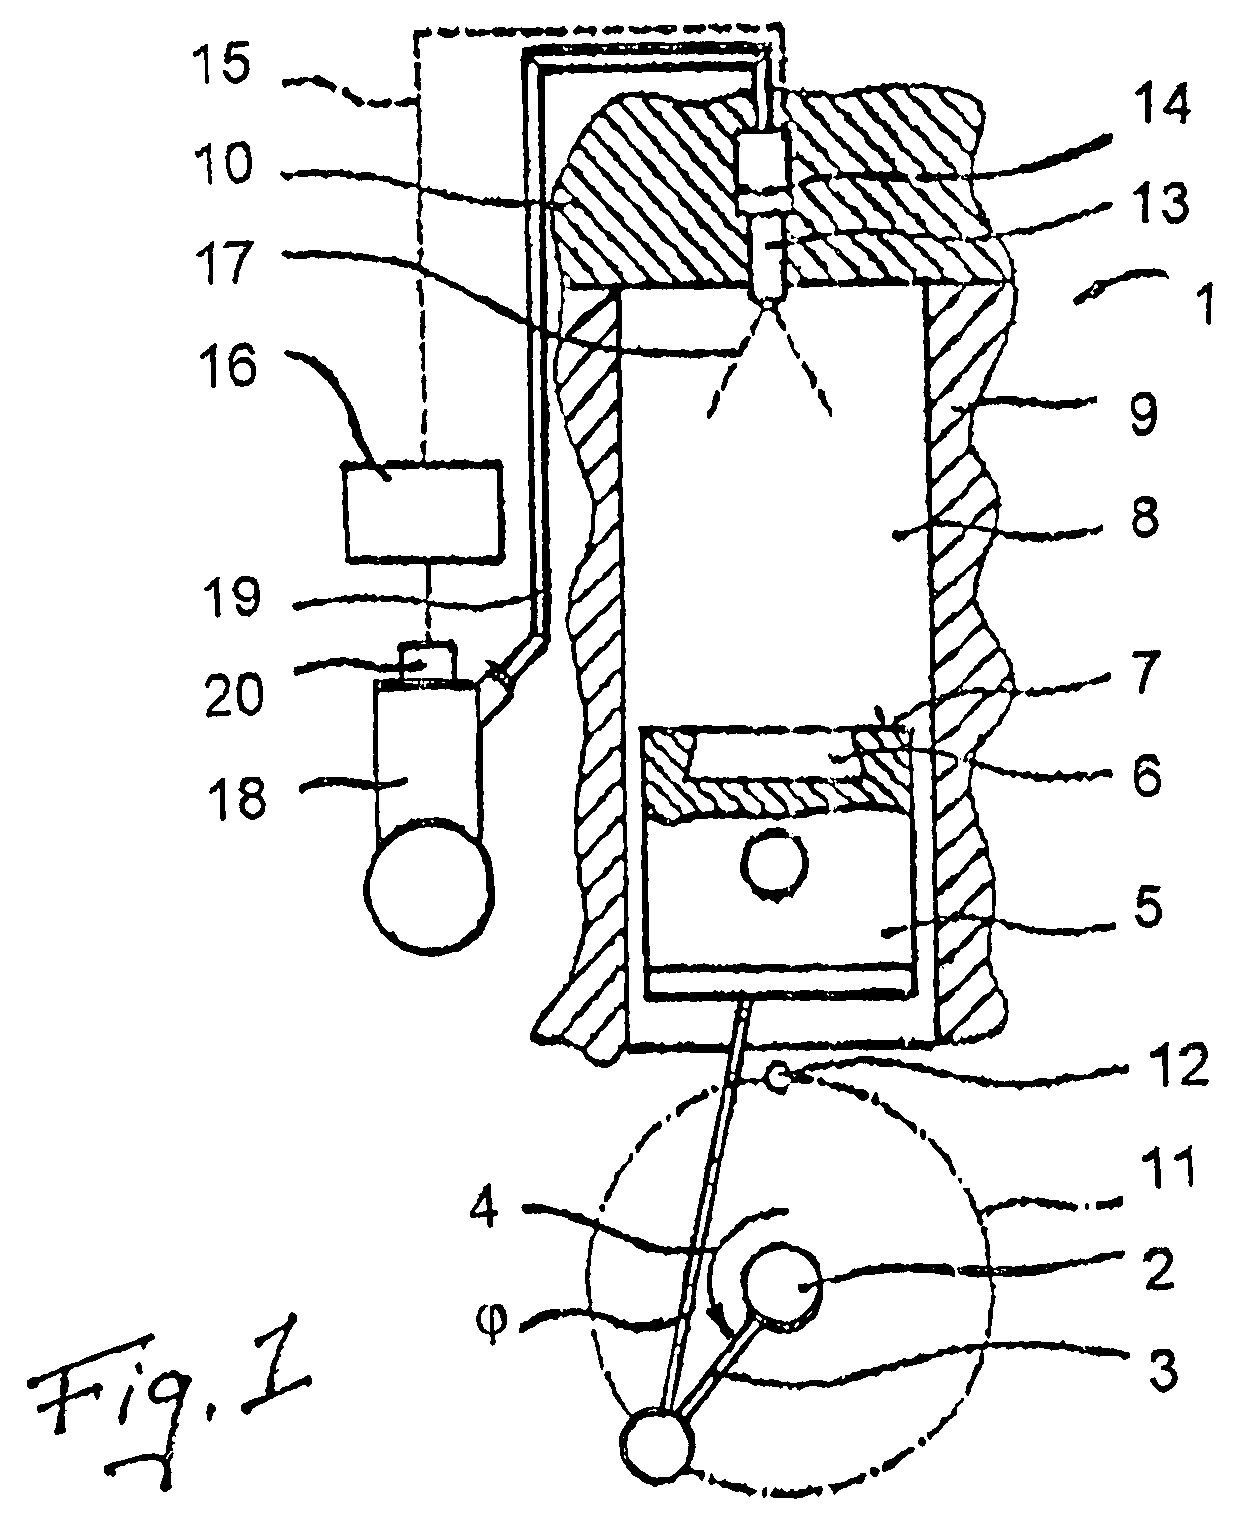 Method of operating an internal combustion engine in an engine warm-up phase